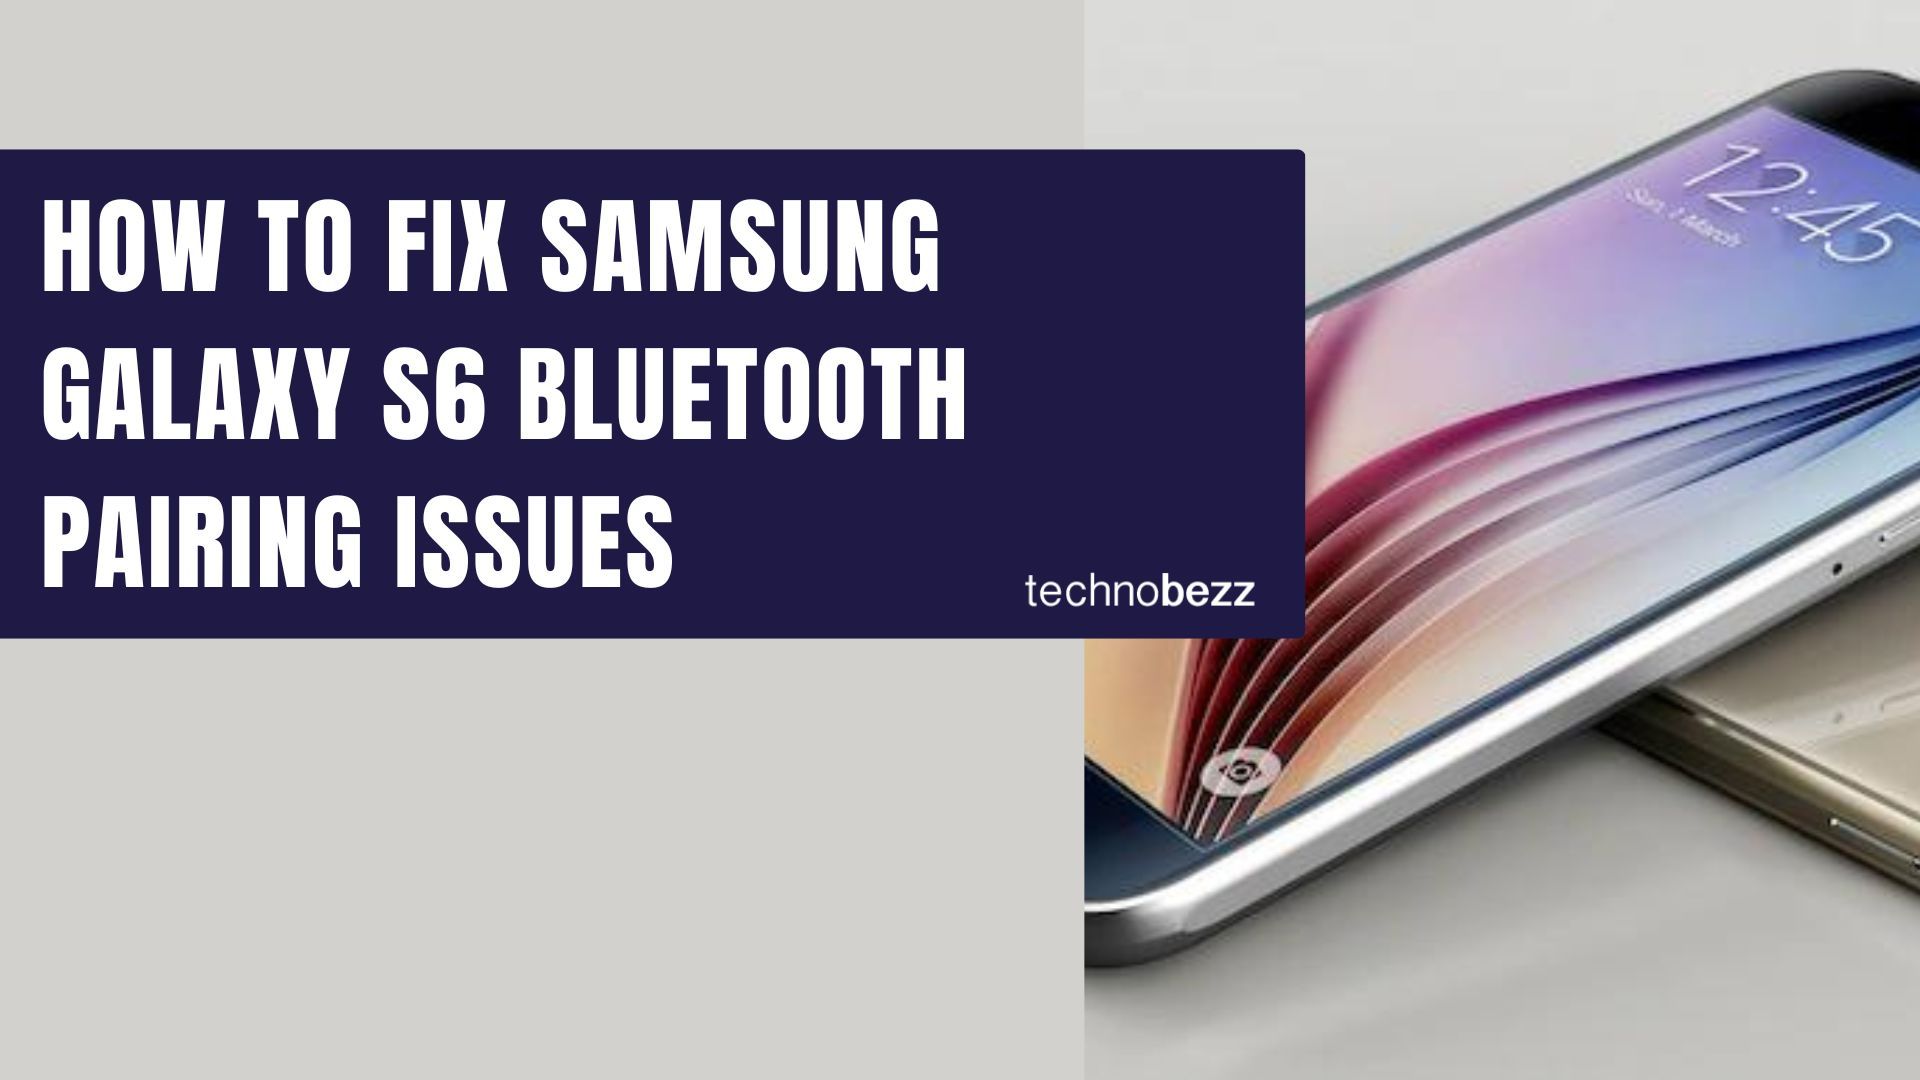 Restart your Samsung Galaxy S6.
Put the Bluetooth device in pairing mode.